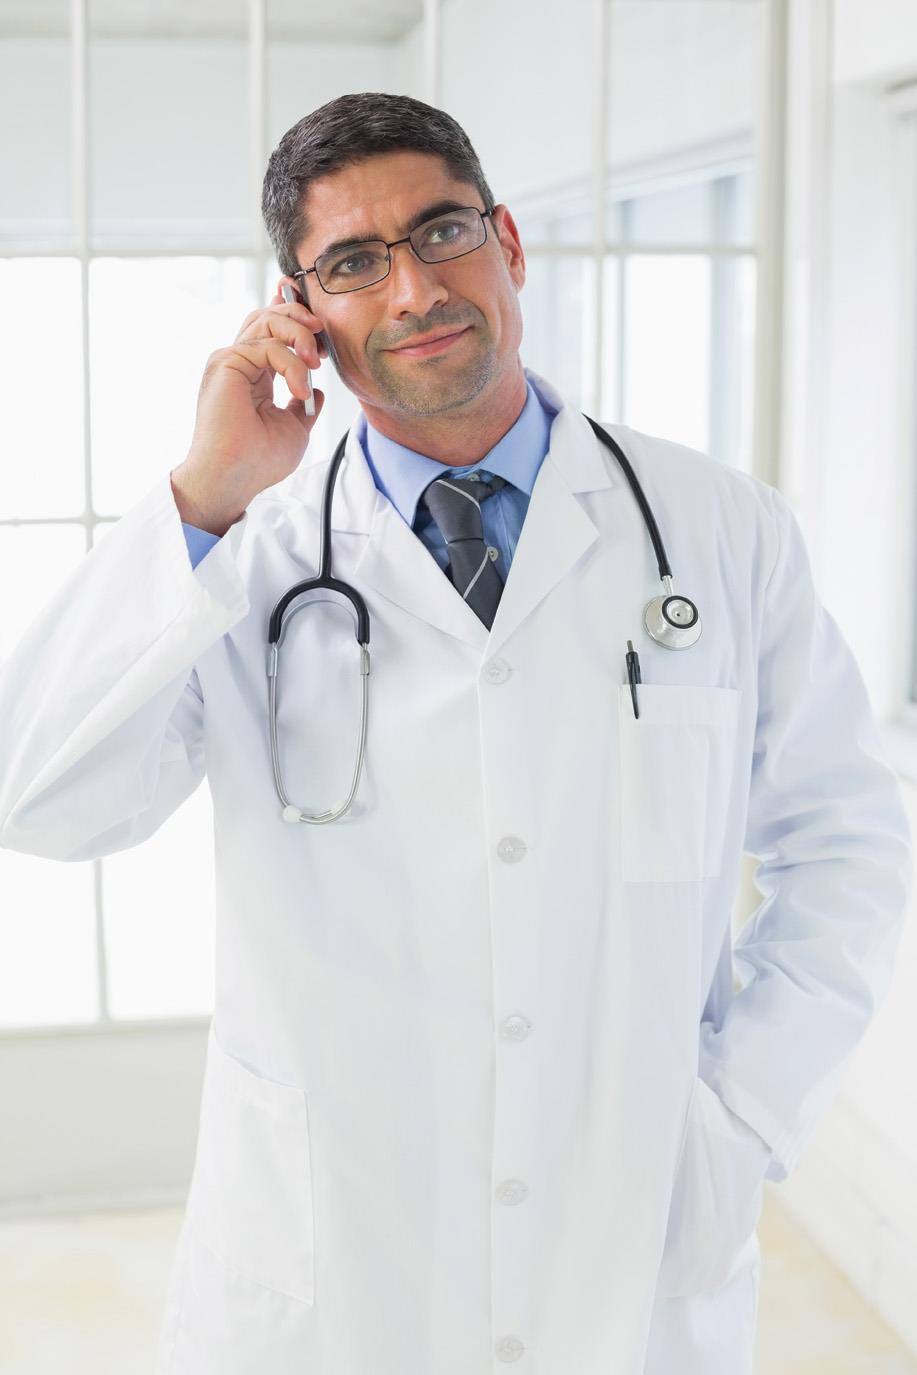 FIGURE 7-4 Many physicians use cell phones to stay